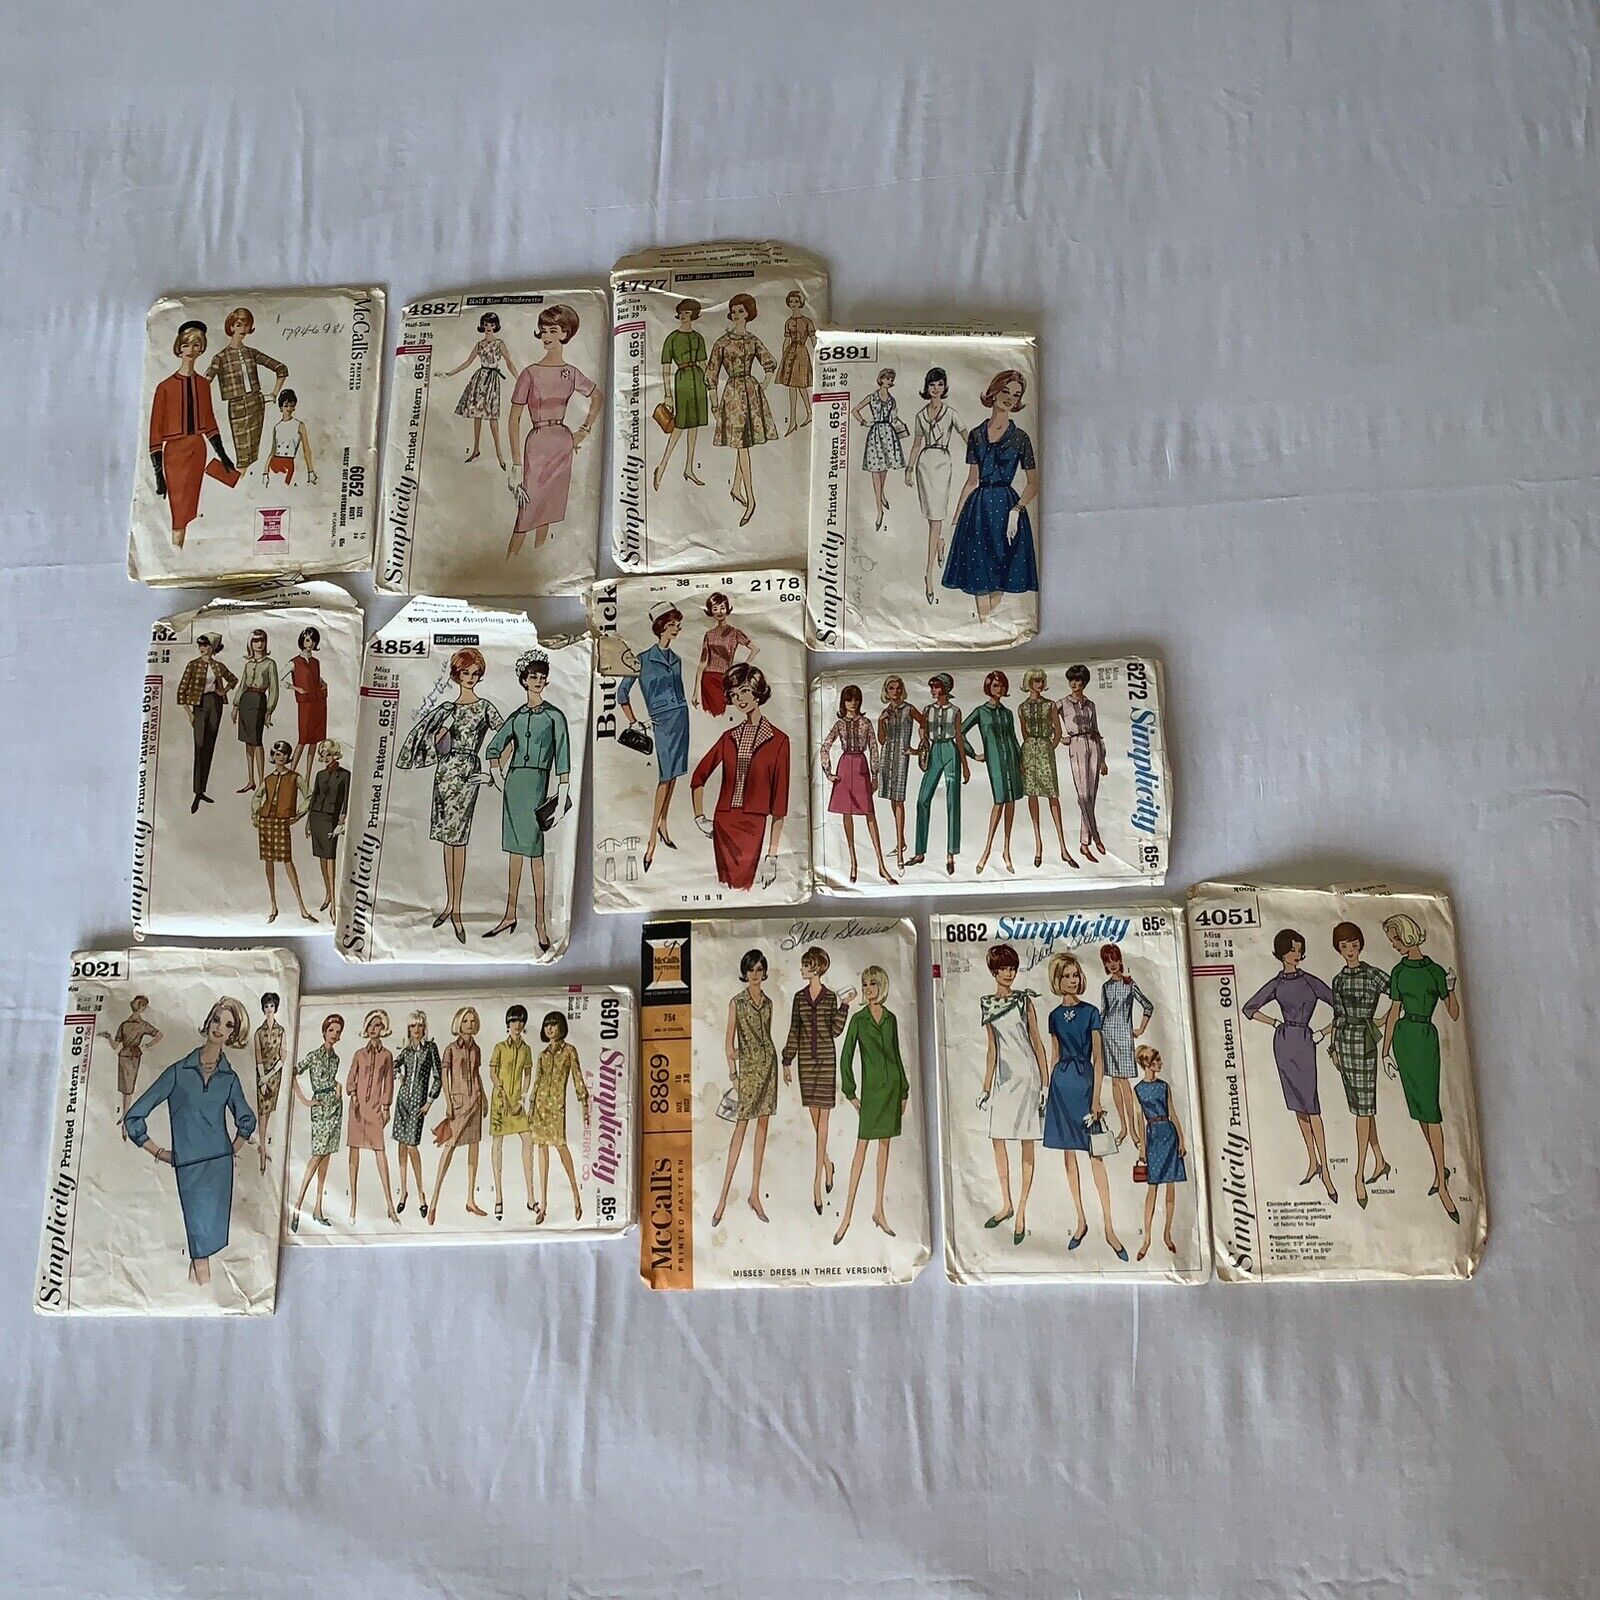 Vintage Sewing Pattern Lot 1960s Mod Dresses Mostly Size 18 CUT UNCHECKED Read